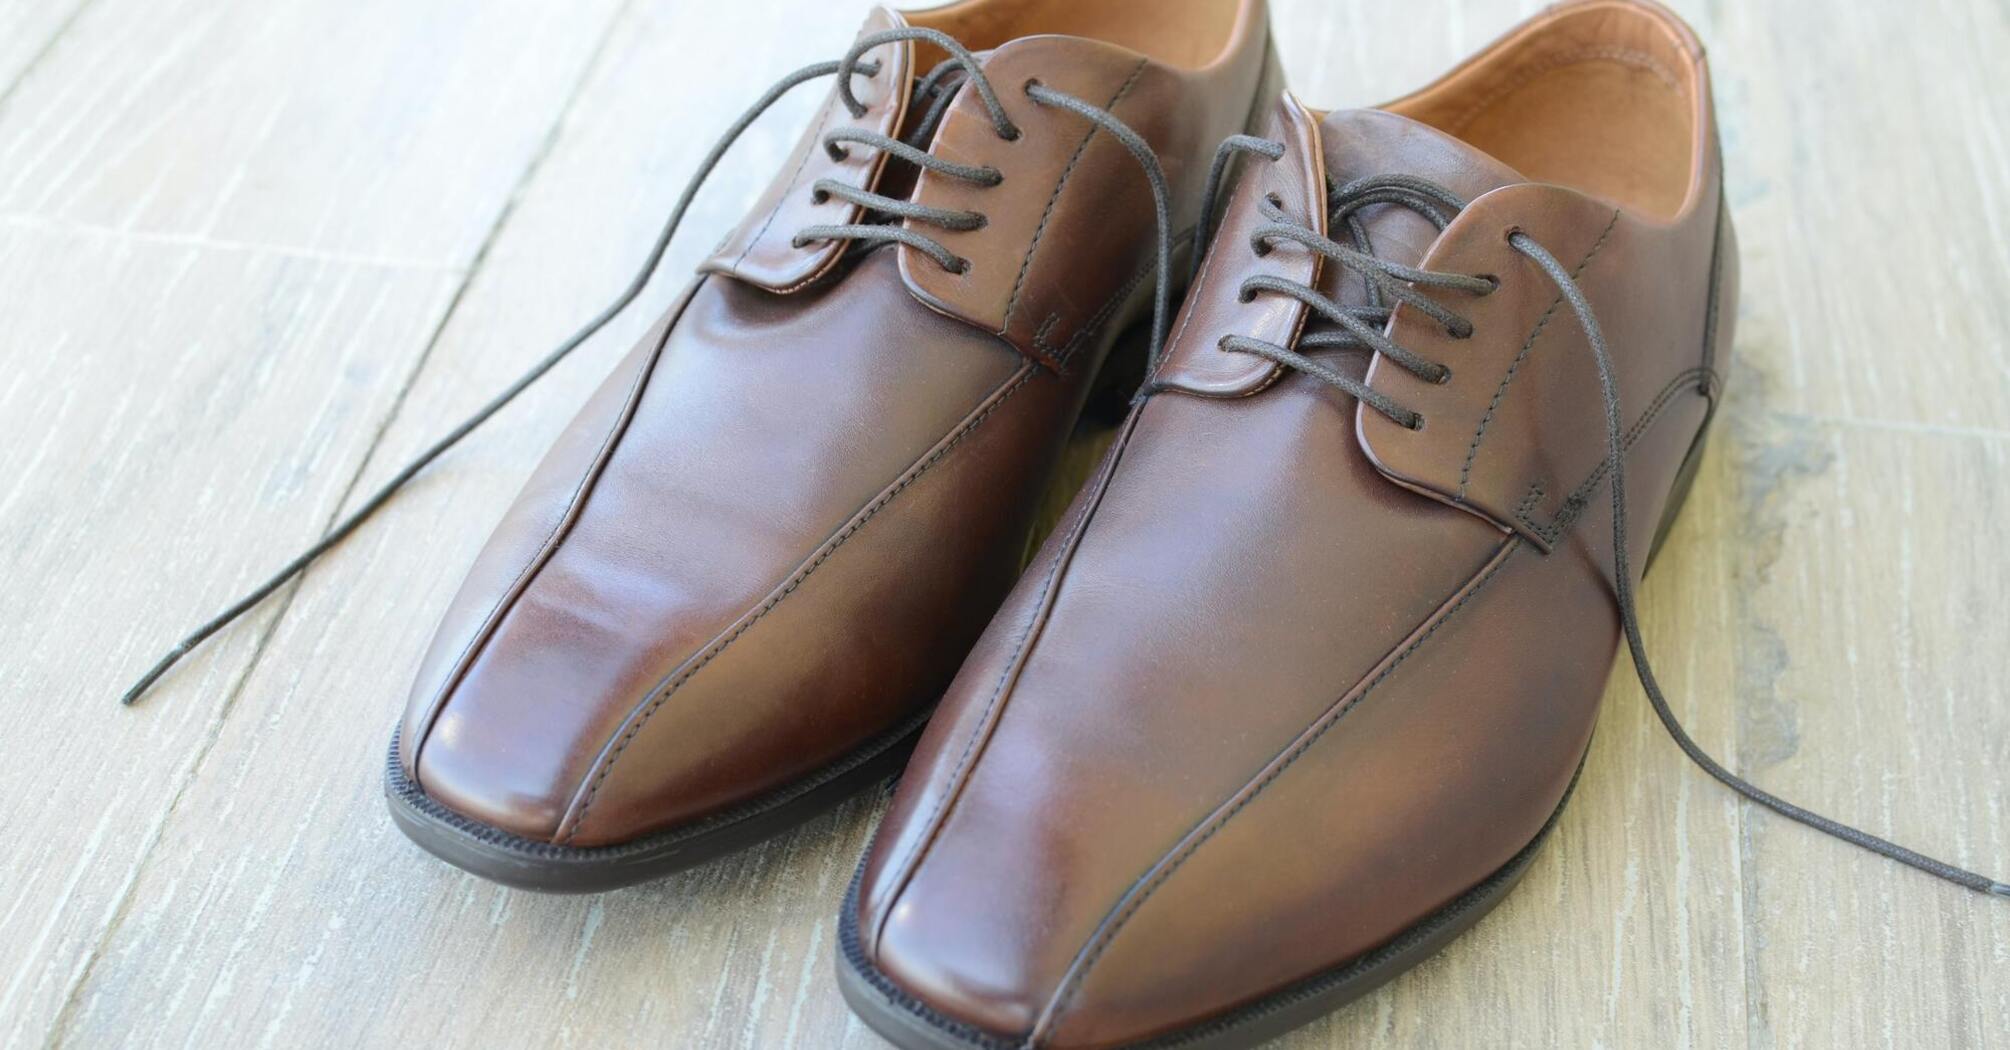 How to stretch tight shoes quickly: 5 effective ways